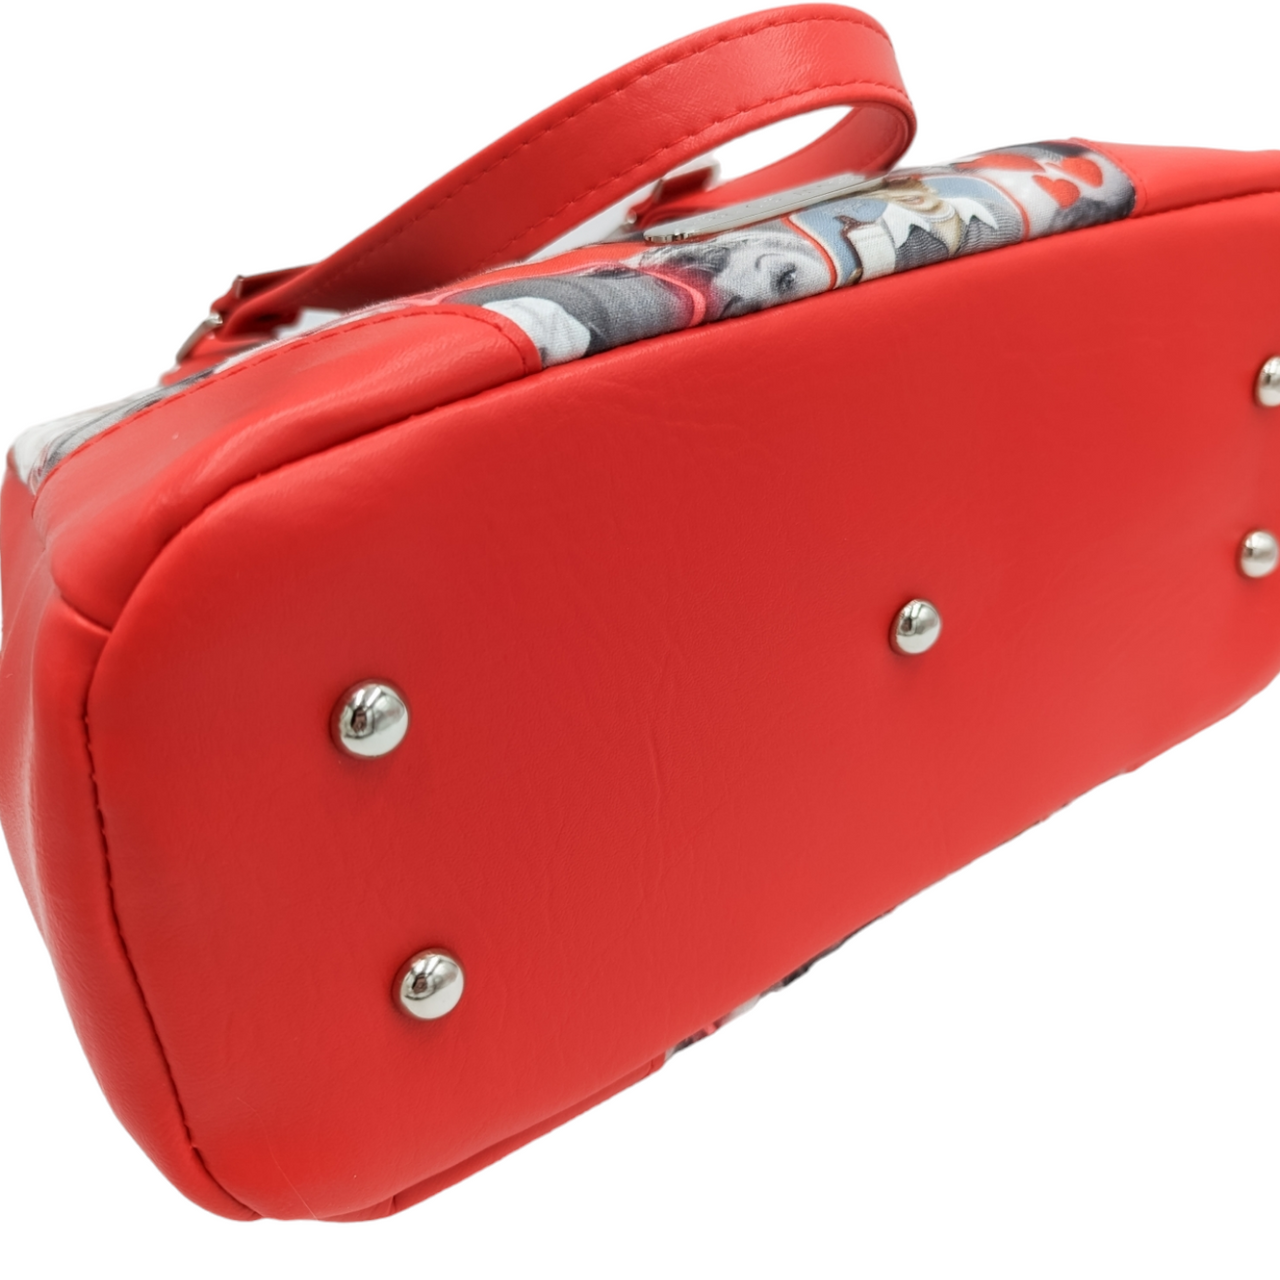 I Love Lucy - Red HYD Bowler Bag